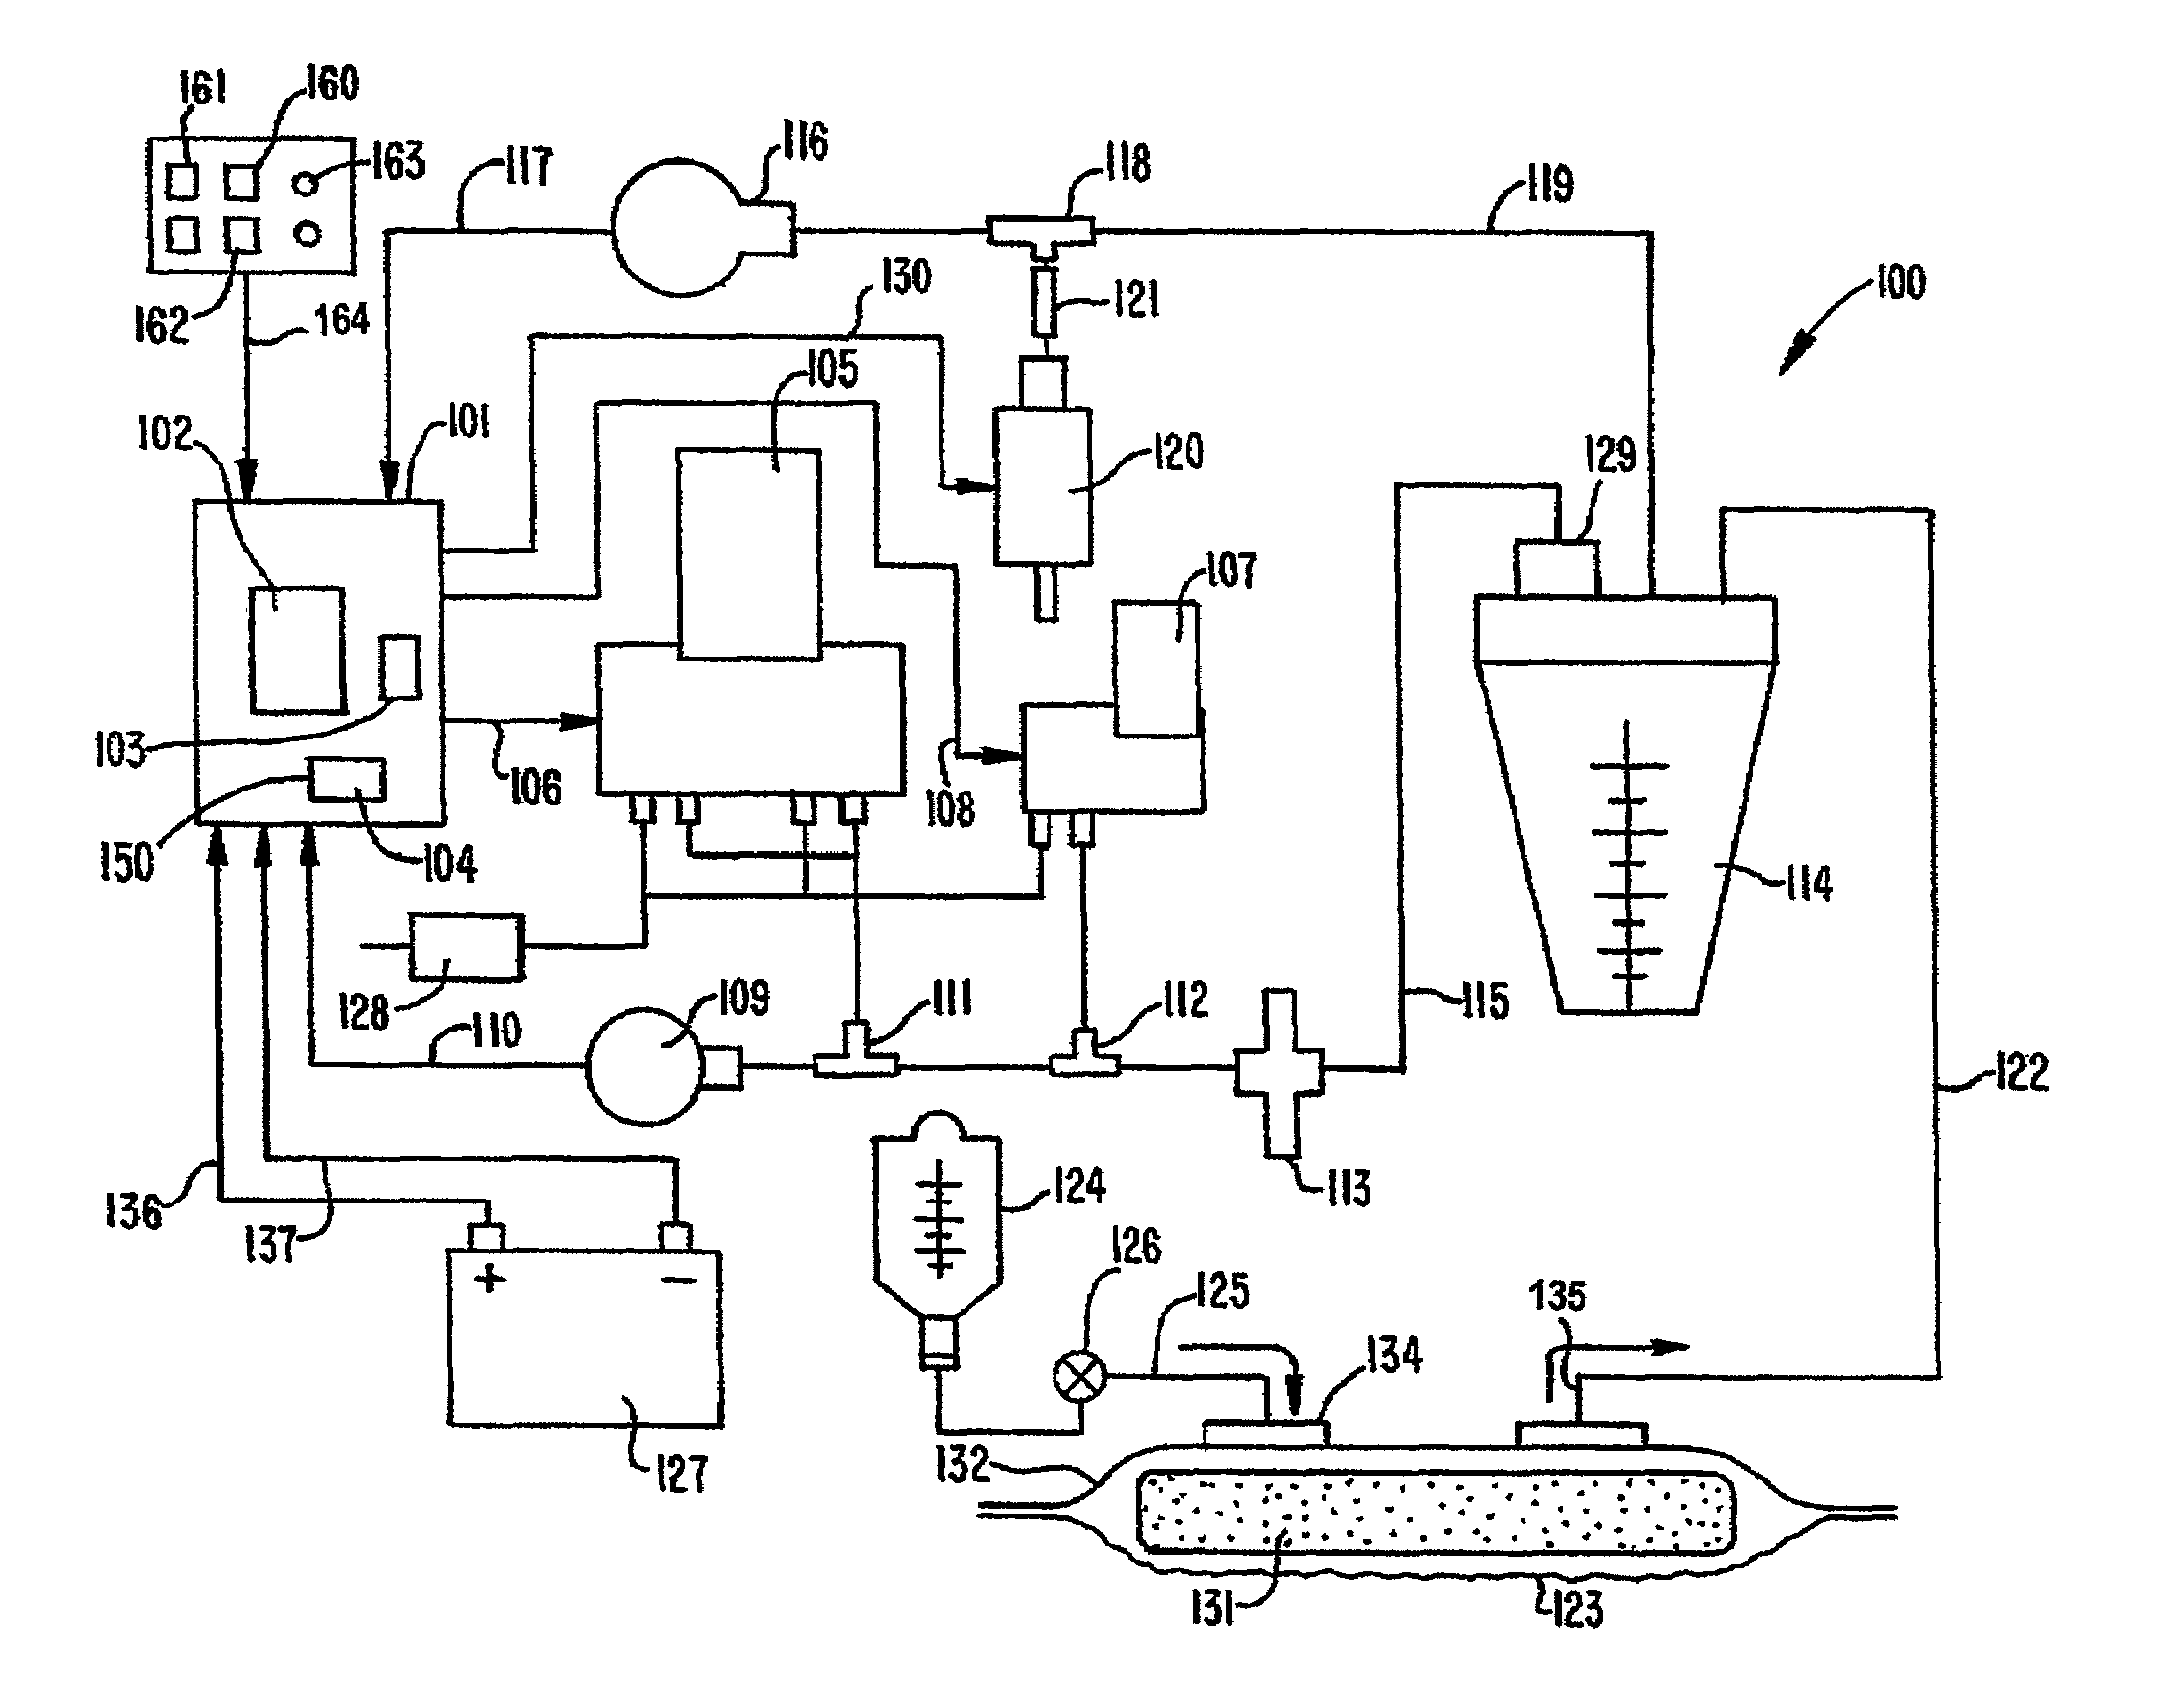 Wound irrigation device pressure monitoring and control system